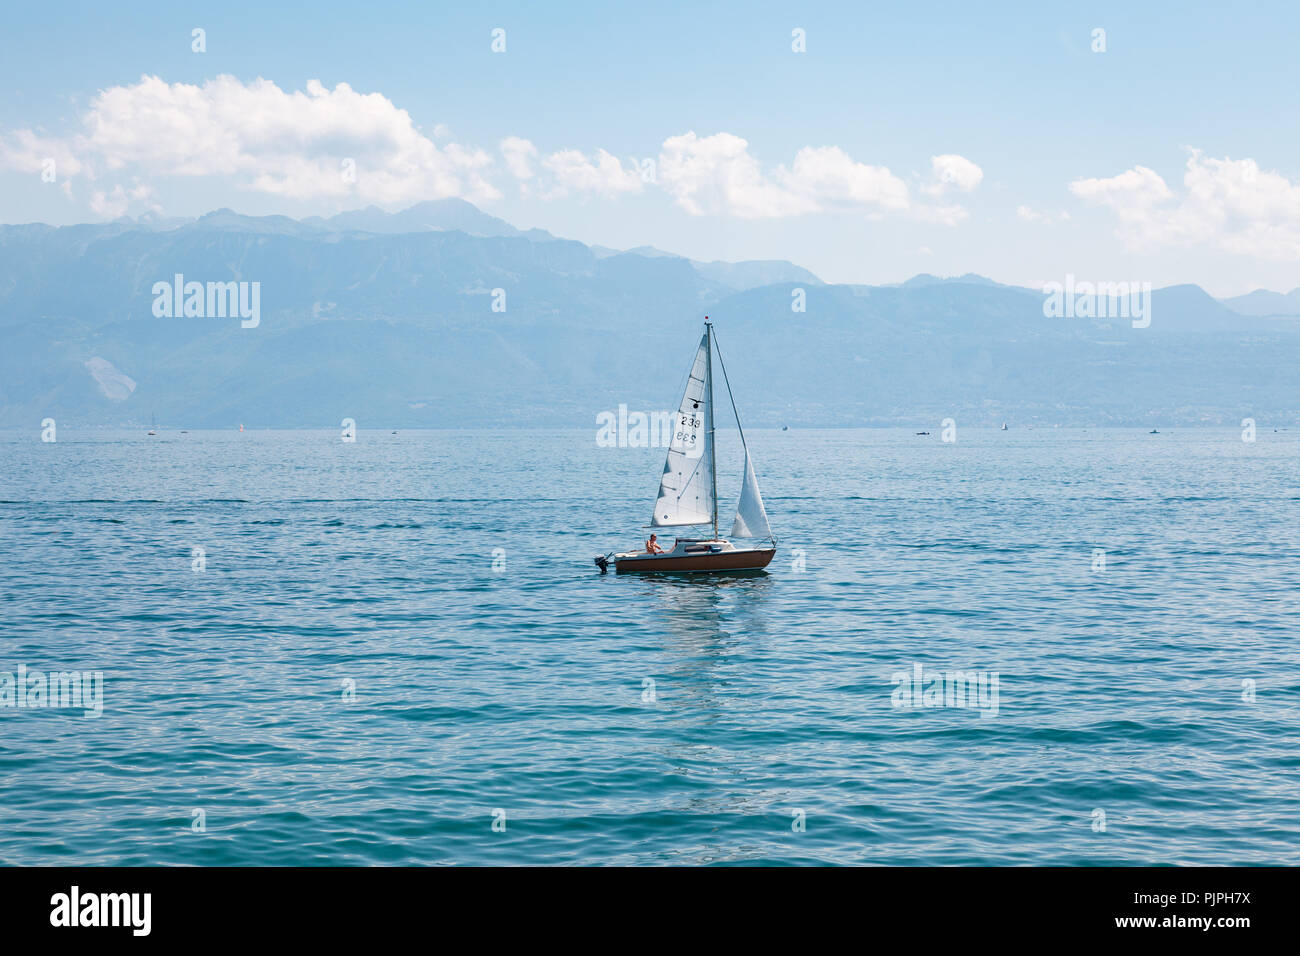 Small sail boat on Lake Leman (Geneva Lake) on beautiful sunny summer day with mountains and white clouds on the background Stock Photo